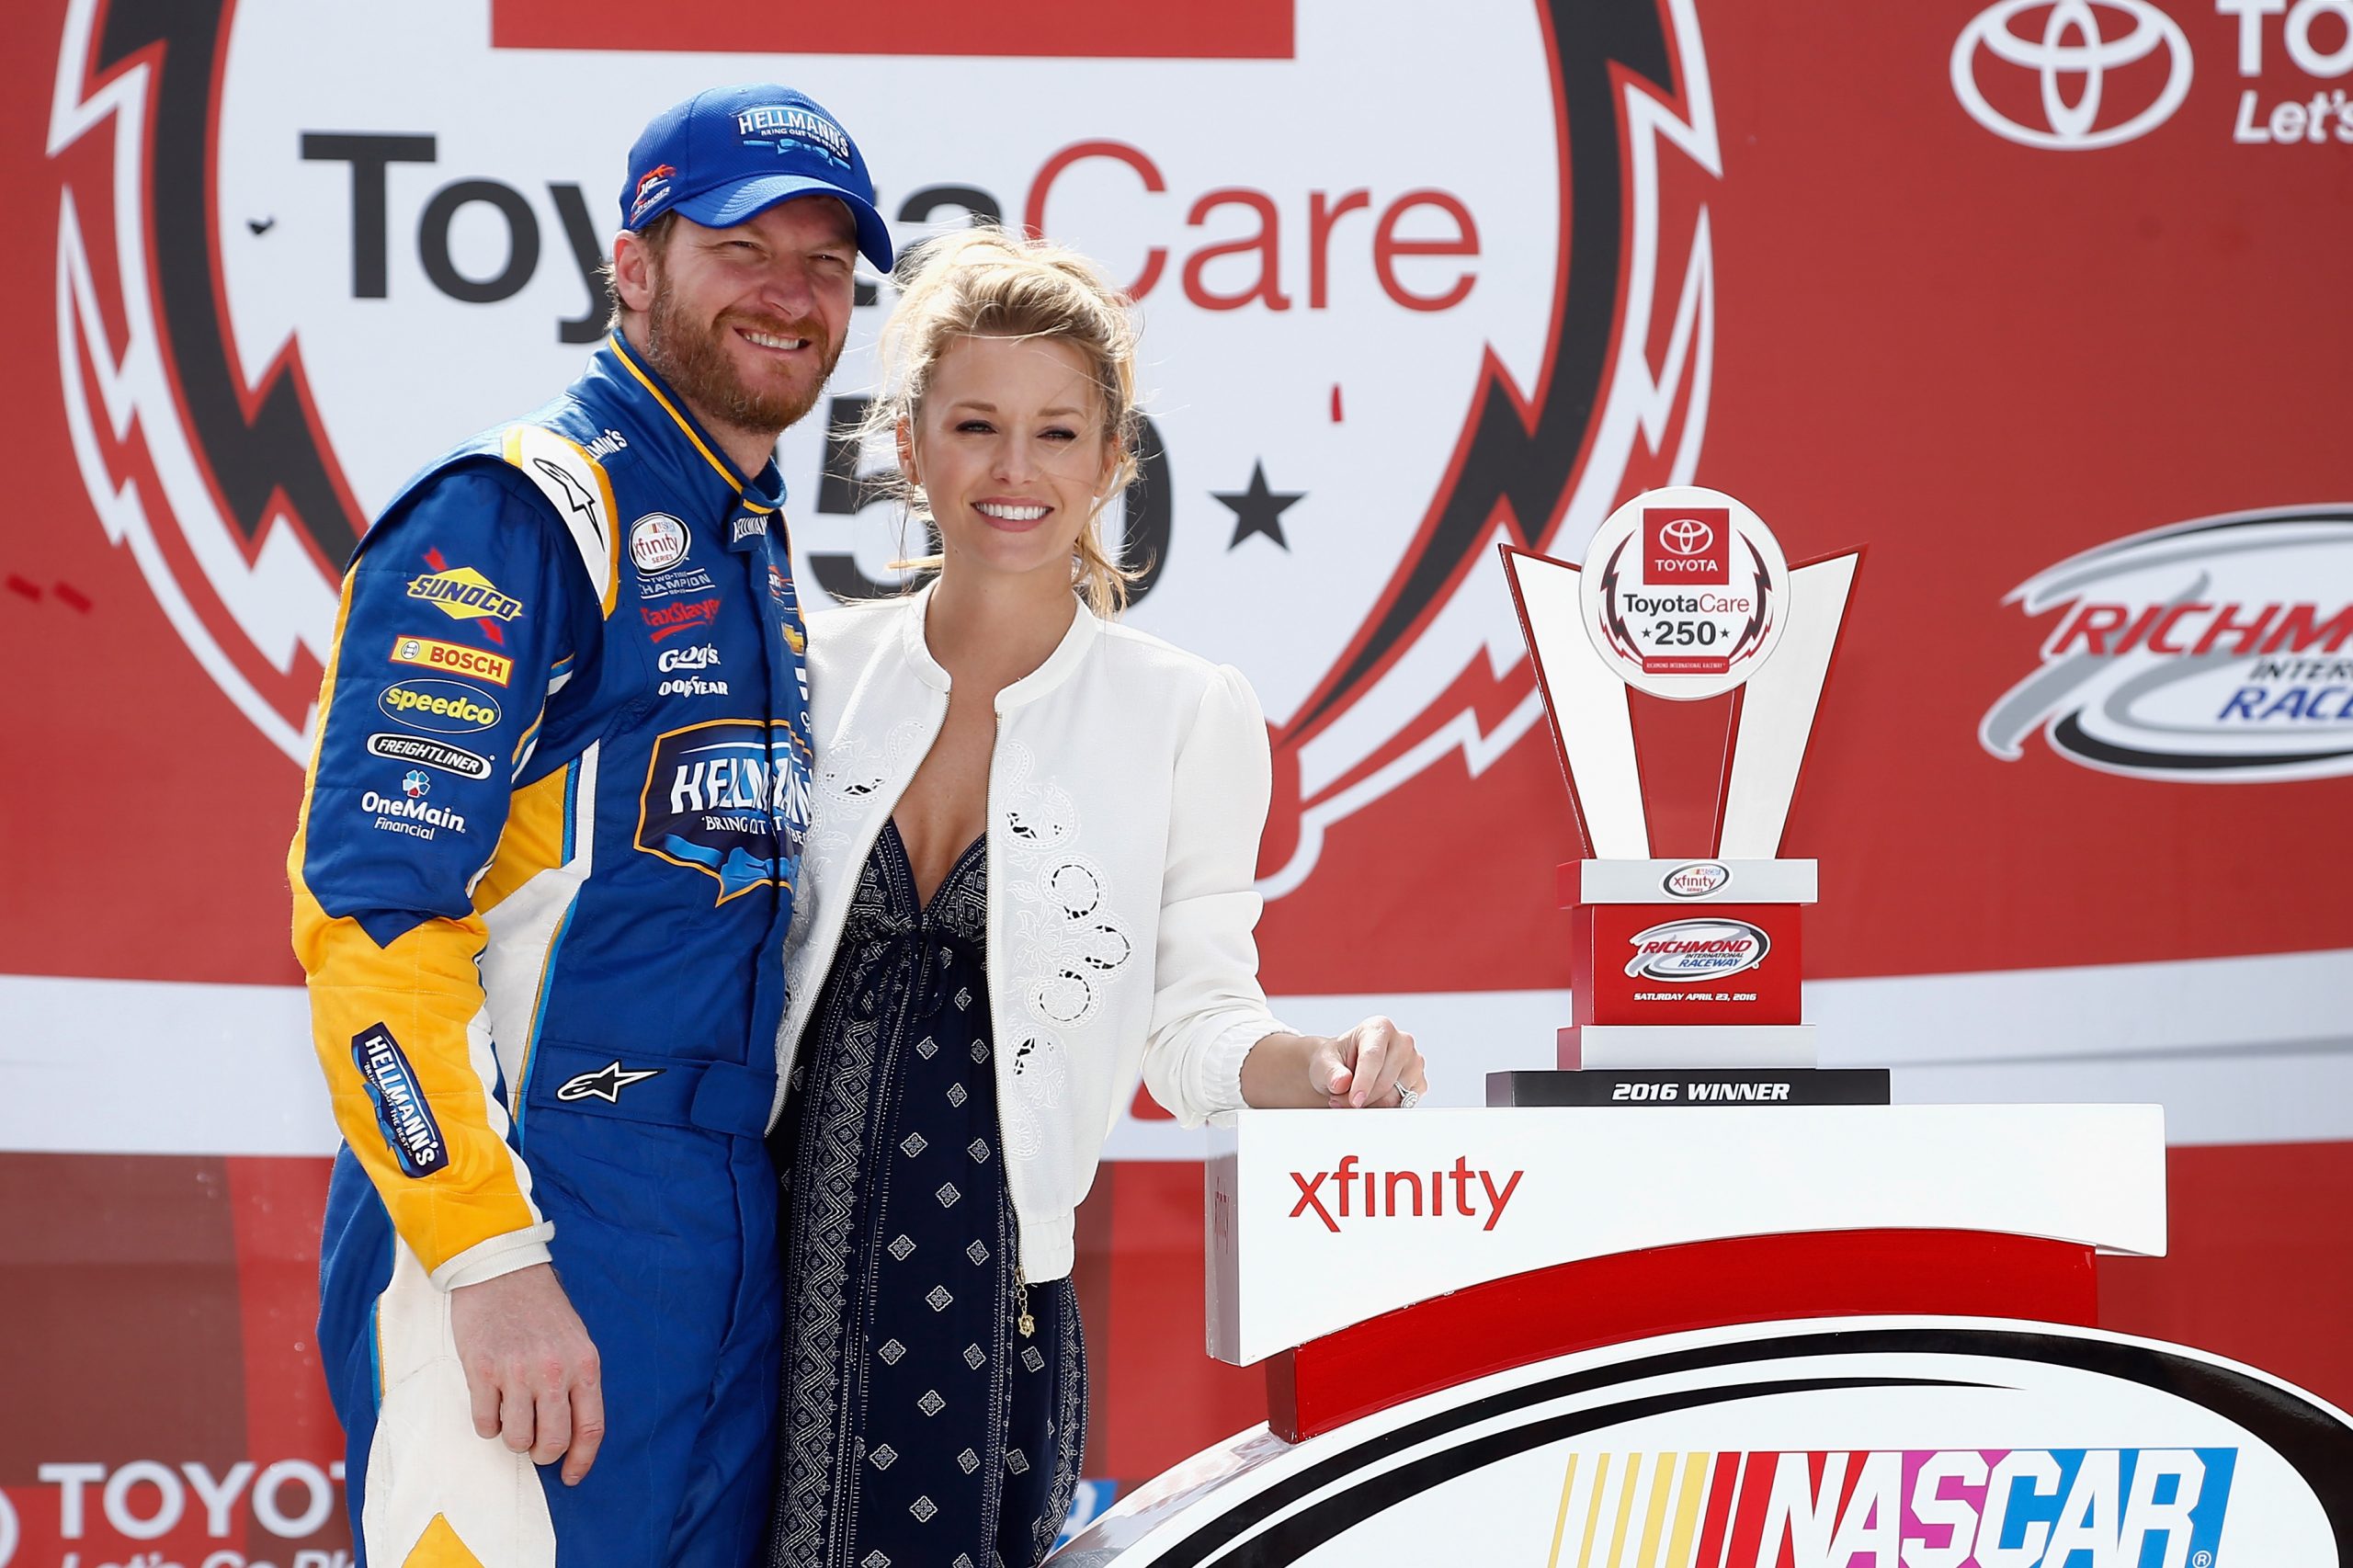 With some help from his wife Amy, Dale Earnhardt Jr. got what he wanted on his first Father's Day.